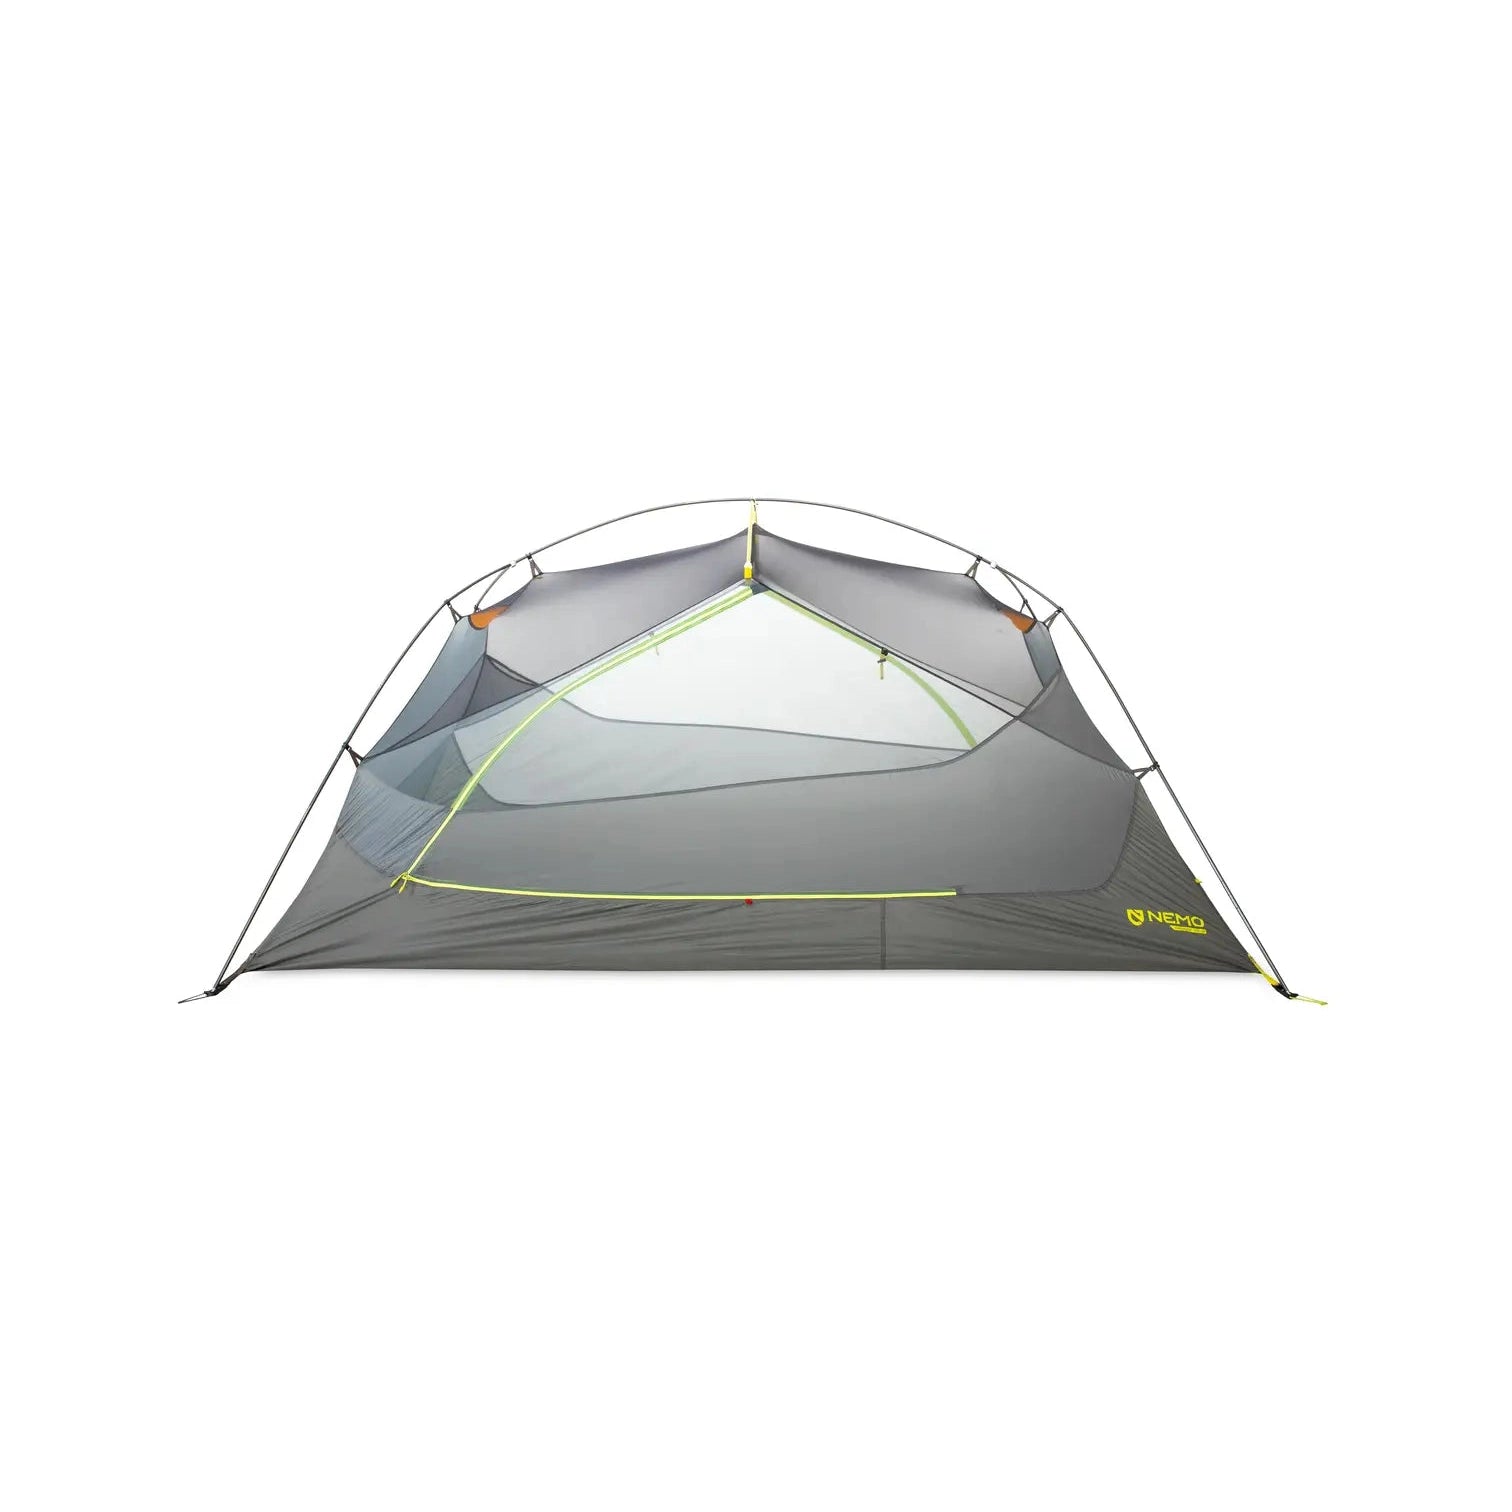 NEMO Dagger OSMO Lightweight Backpacking Tent 3 Person